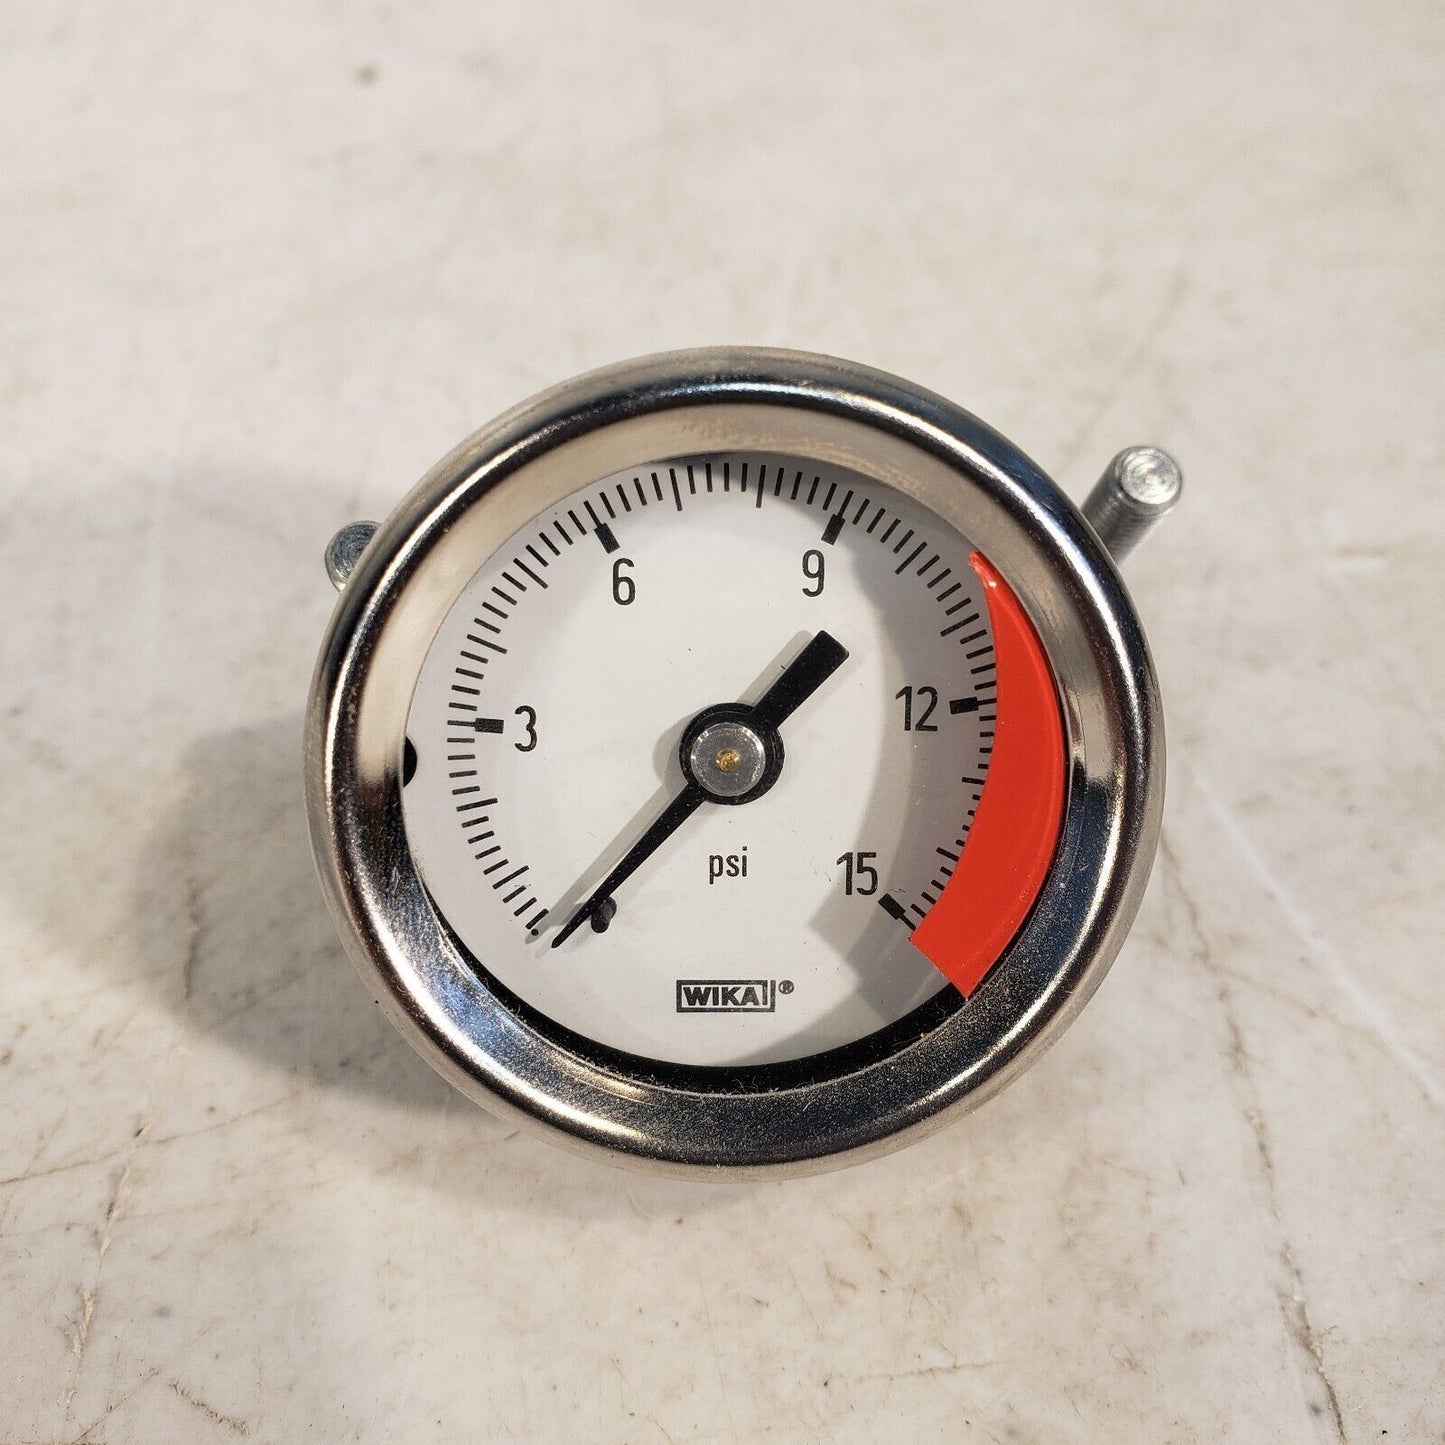 Wika Pressure Gauge From Lepo FP-528, 15 PSI